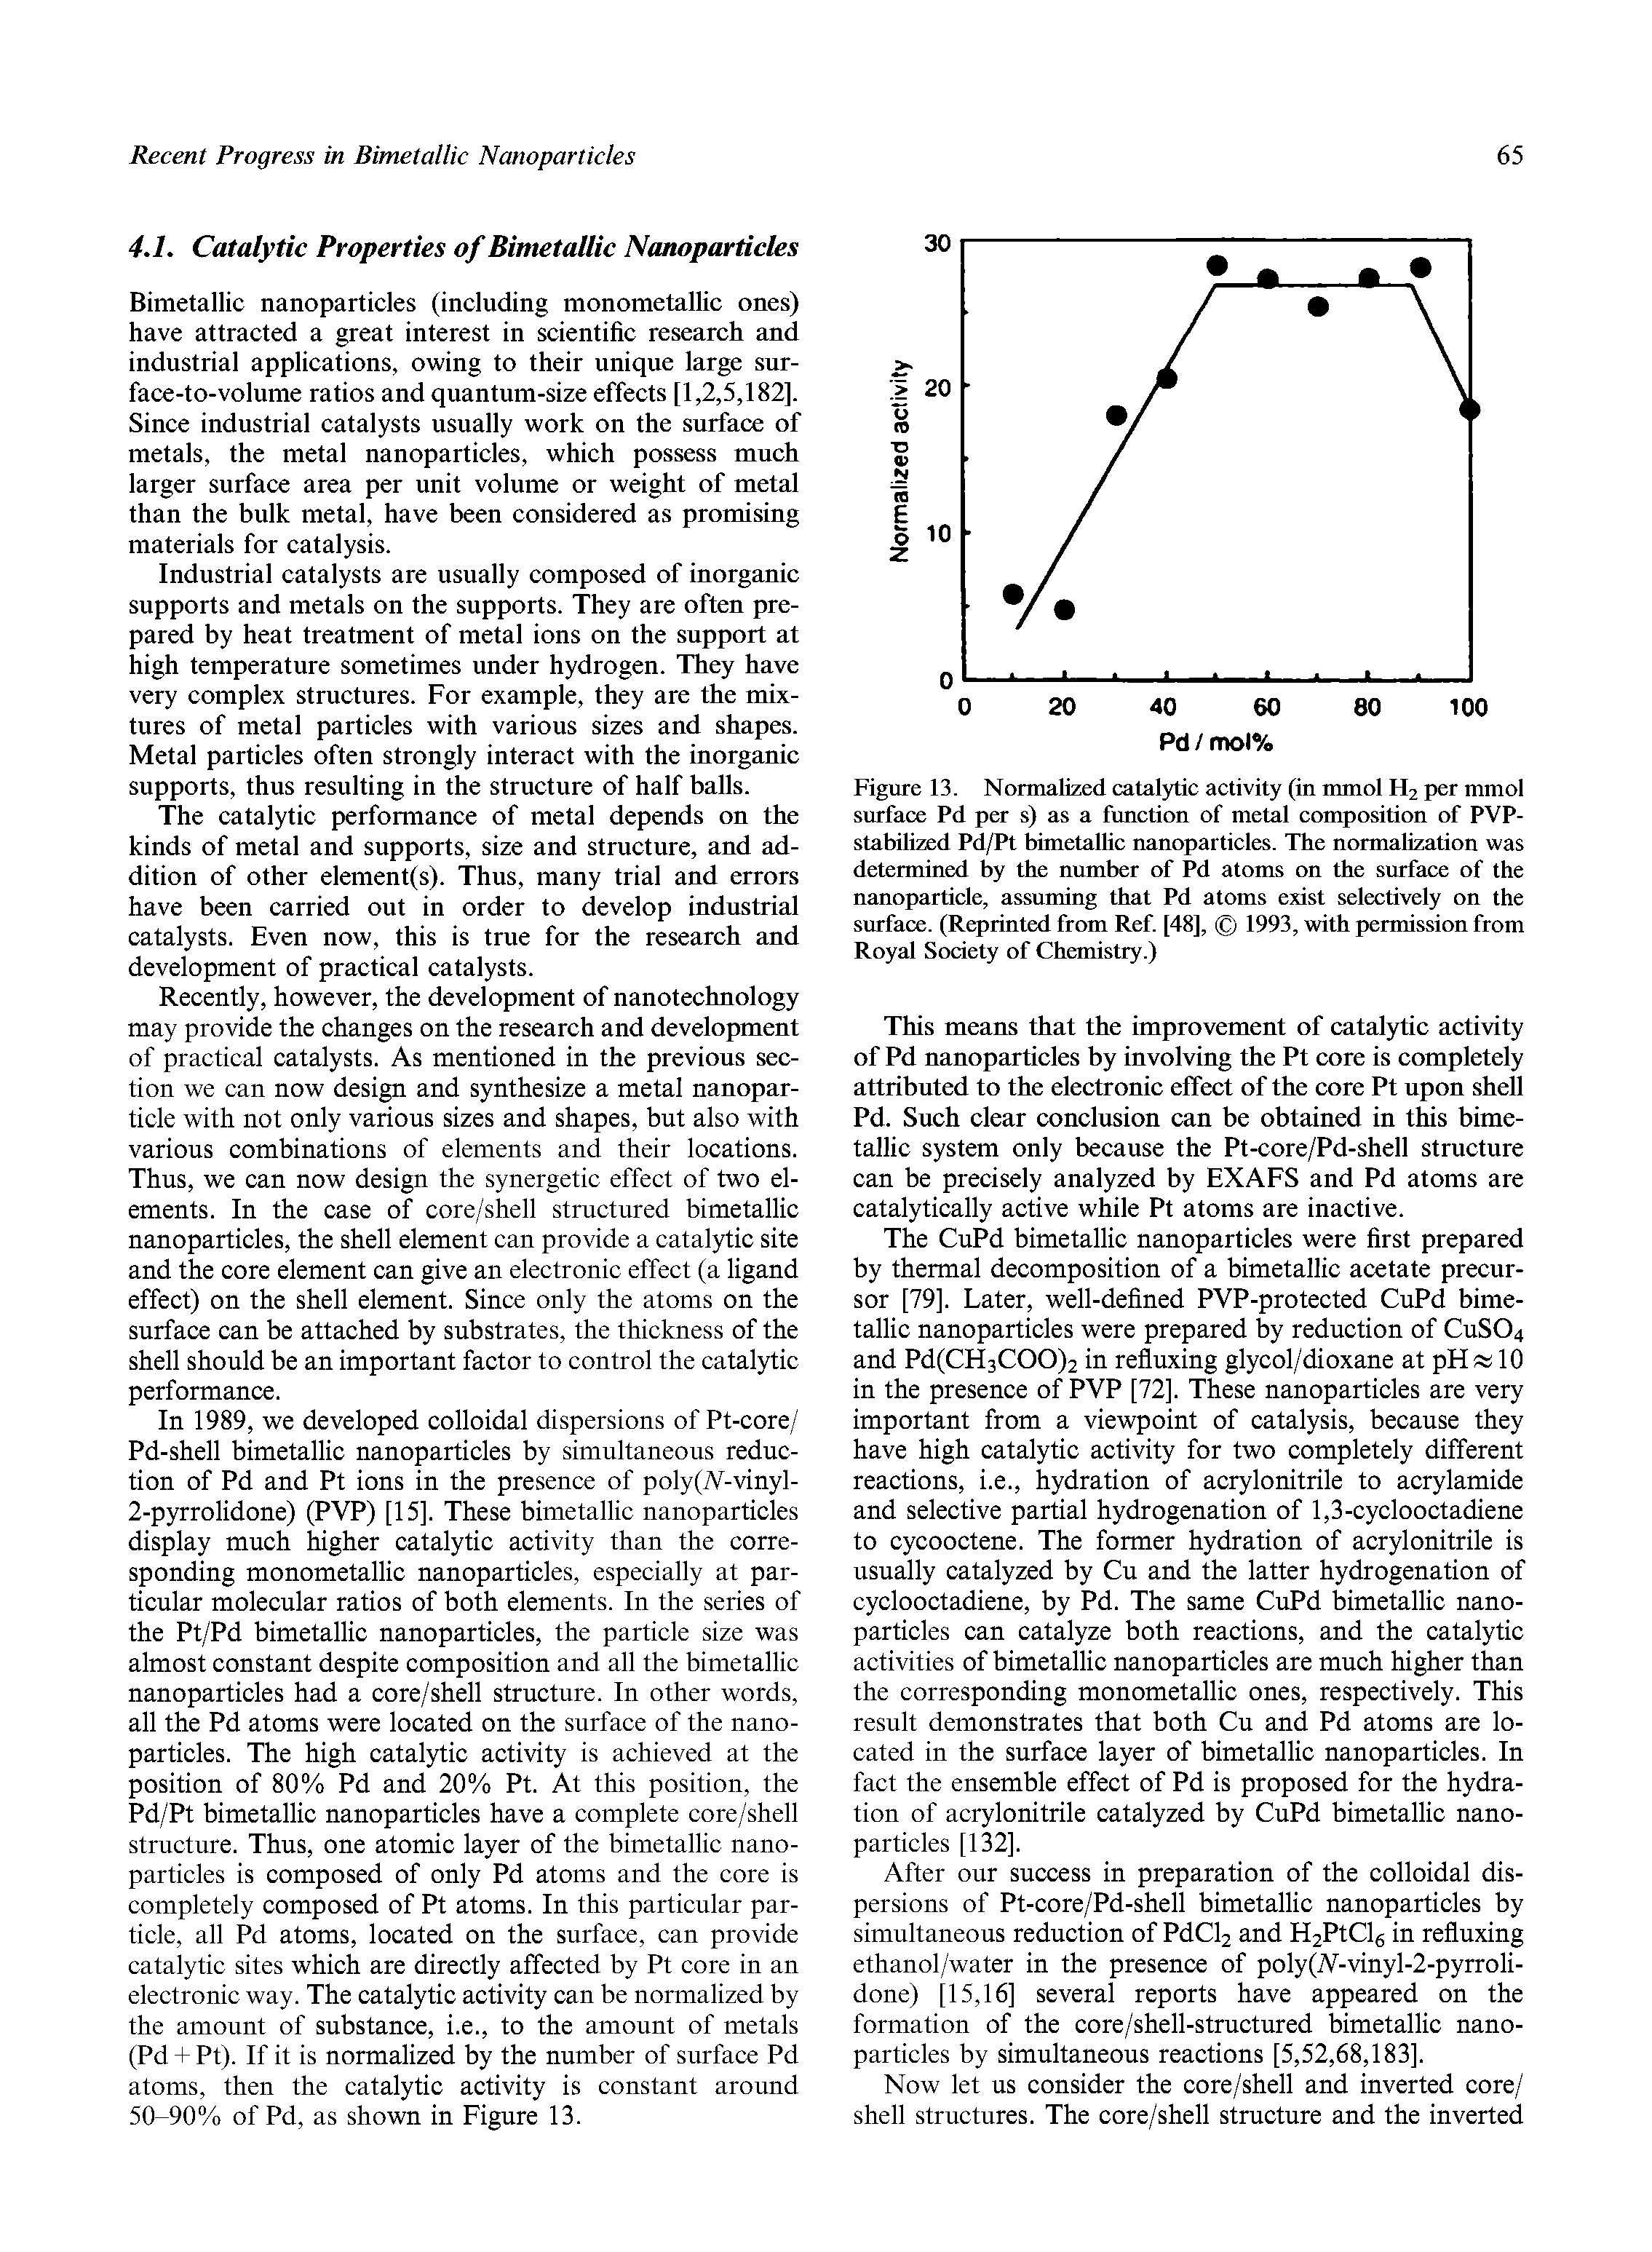 Figure 13. Normalized catalytic activity (in mmol H2 per mmol surface Pd per s) as a function of metal composition of PVP-stabilized Pd/Pt bimetallic nanoparticles. The normalization was determined by the number of Pd atoms on the surface of the nanoparticle, assuming that Pd atoms exist selectively on the surface. (Reprinted from Ref. [48], 1993, with permission from Royal Society of Chemistry.)...